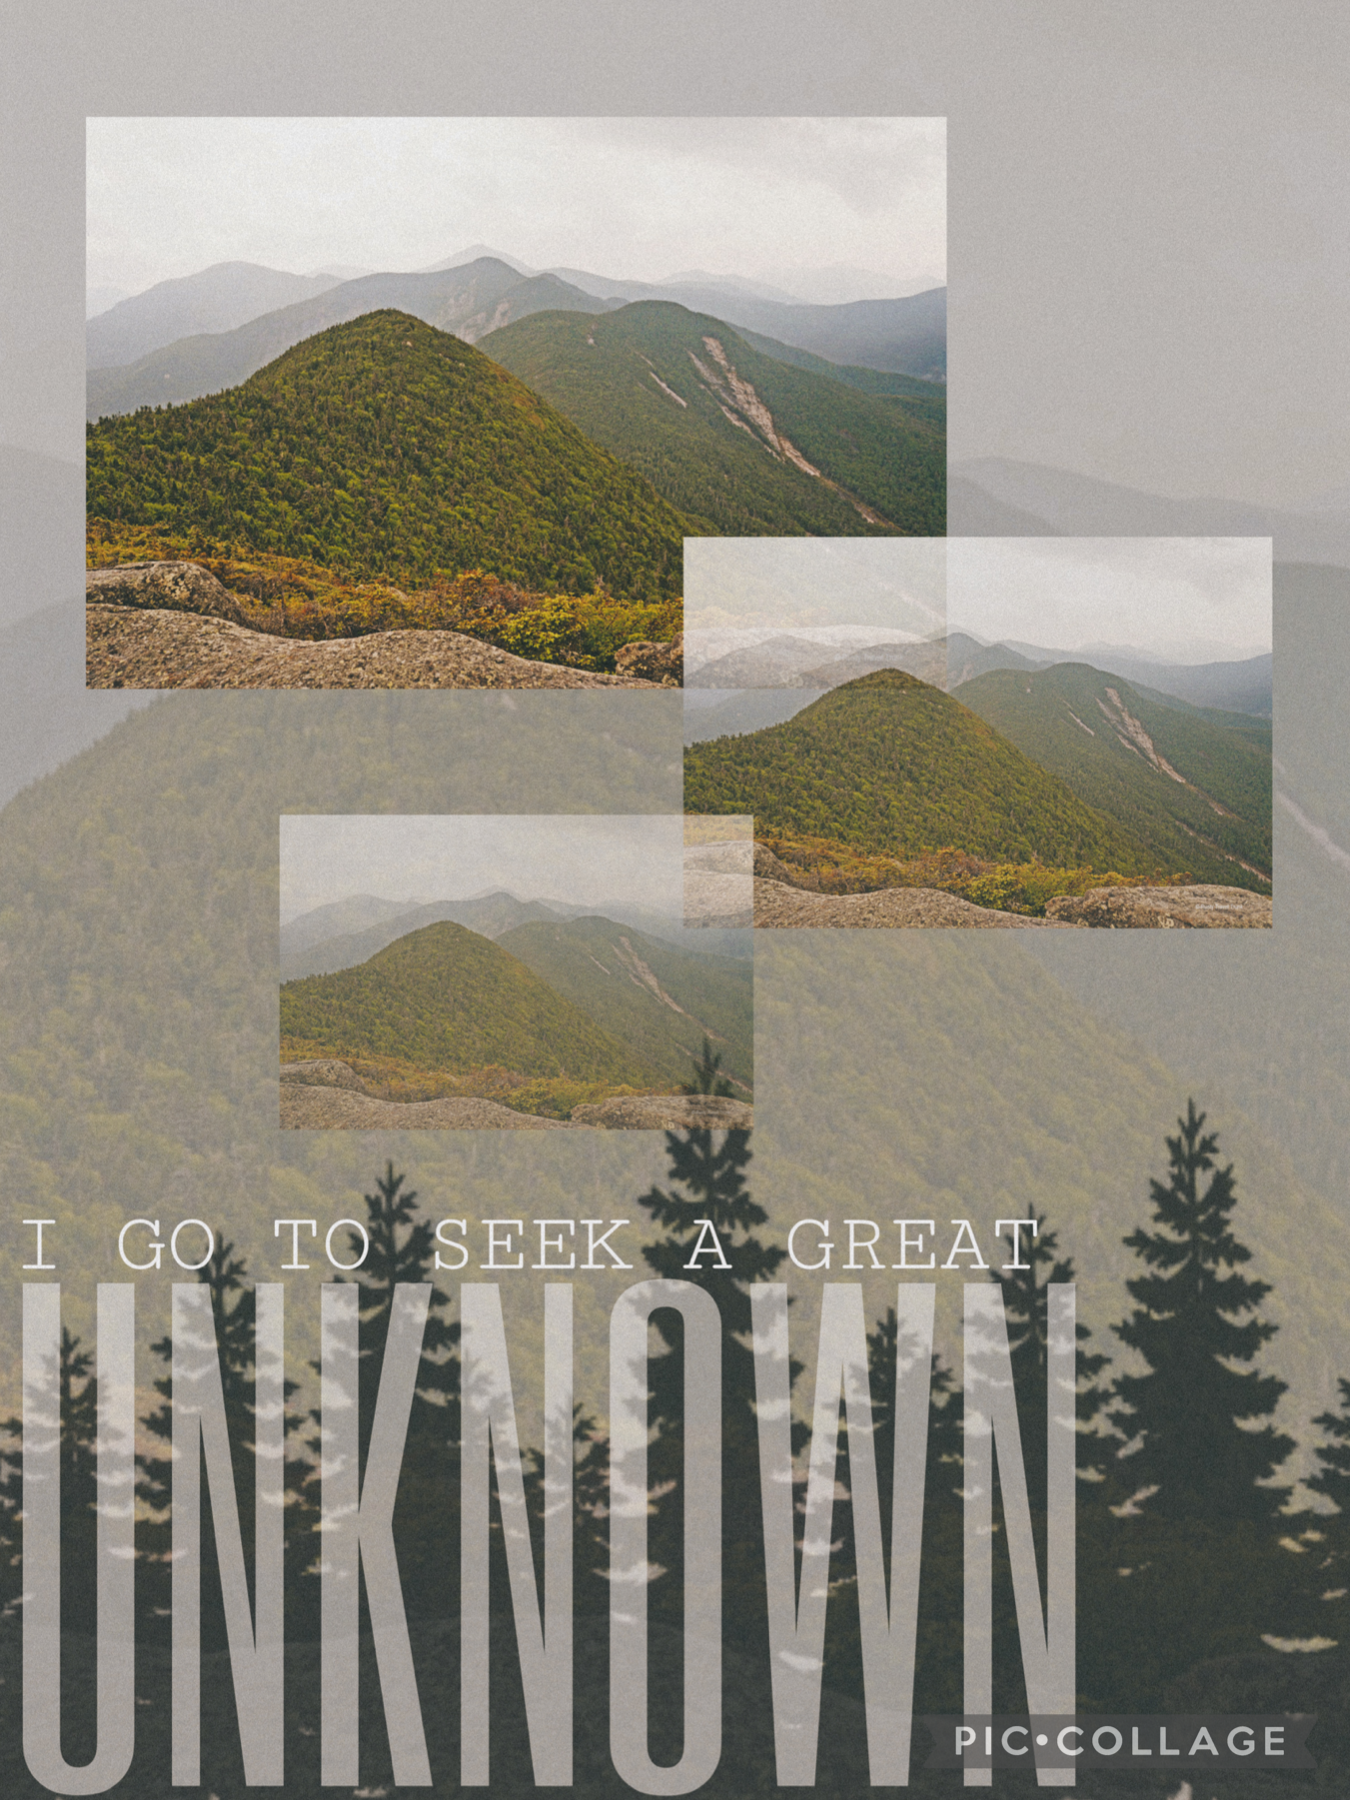 ⛰ 02 - 11 - 21 ⛰
This is a super simple collage, tomorrow is one of the hardest days of the year for me so I am just keeping it simple. This summer has gone way too fast, I can’t believe that tomorrow is the last time I will see my favorite people on the 